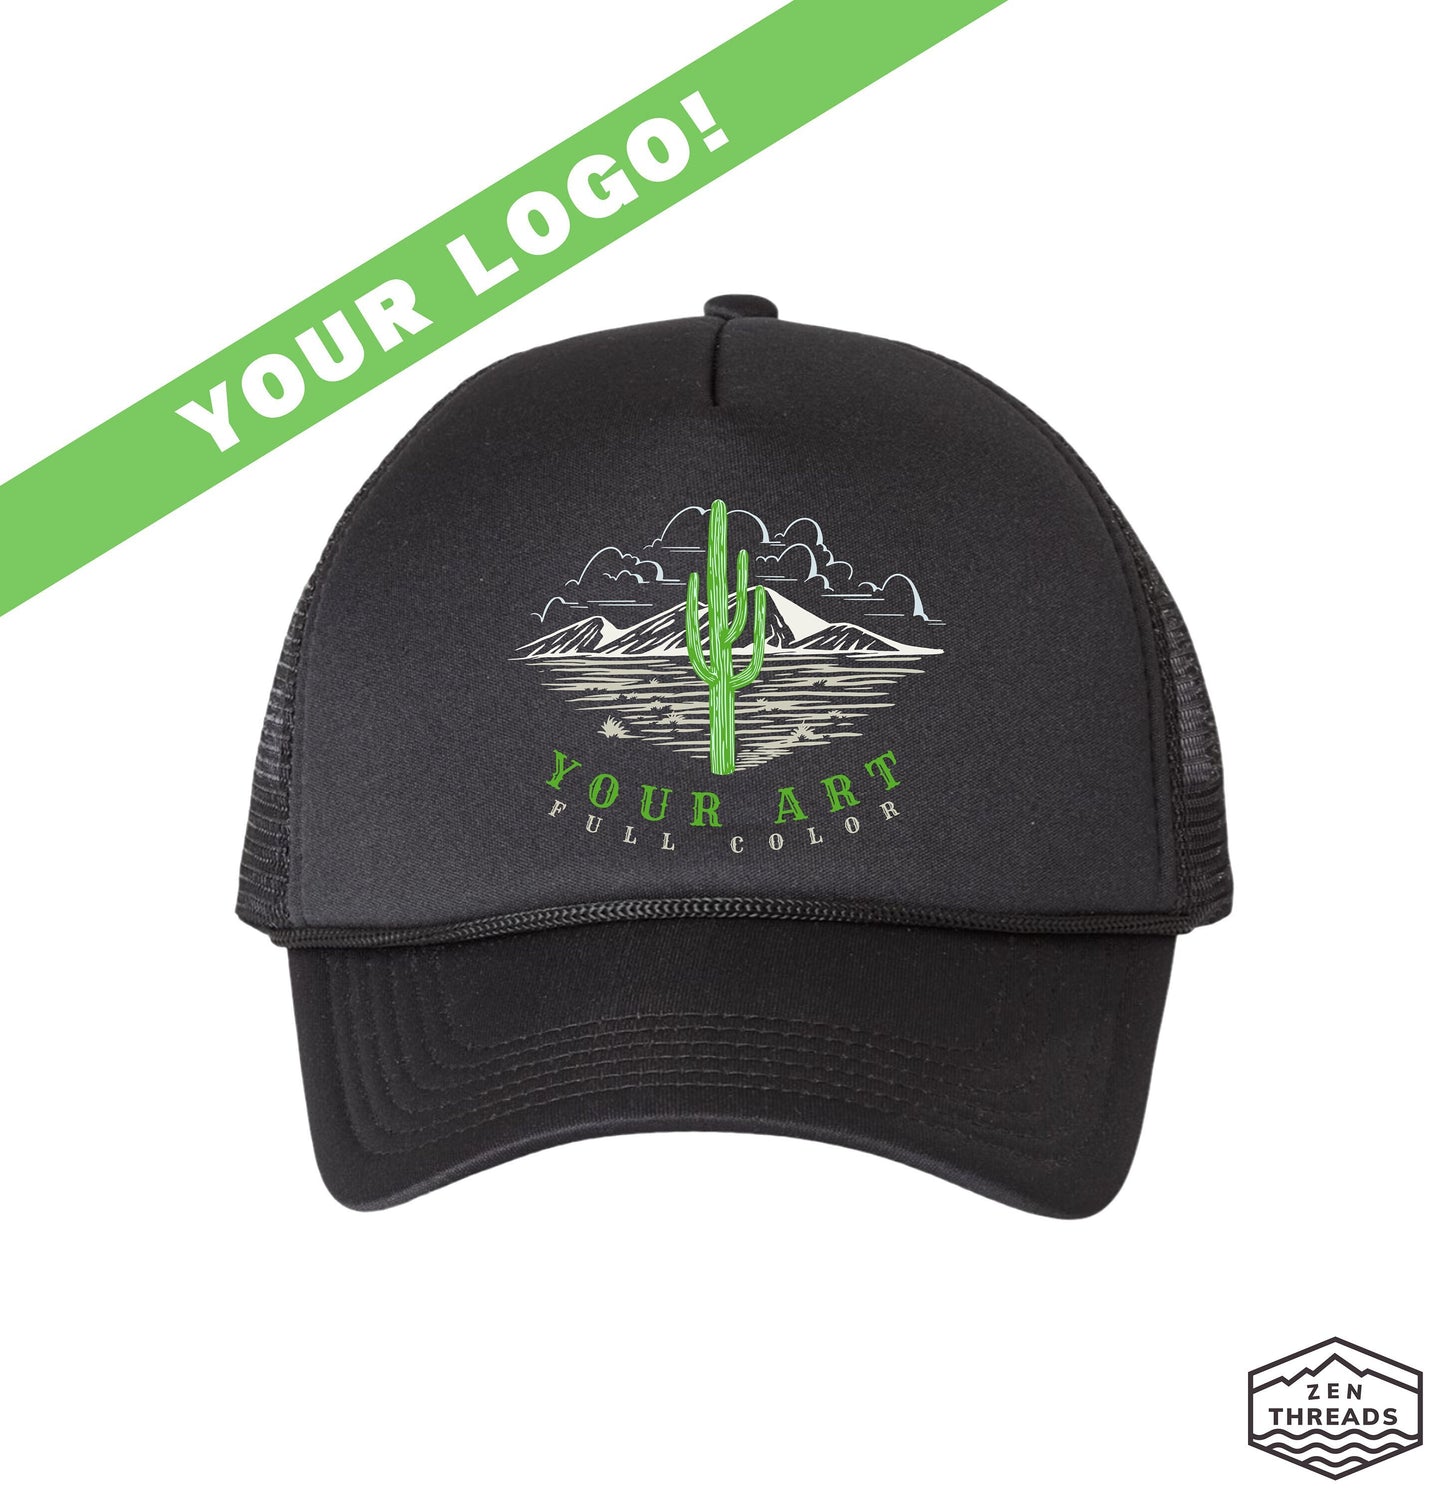 Custom Trucker Old school foam front mesh back unisex one size adjustable your logo printed full color team cap group matching wholesale